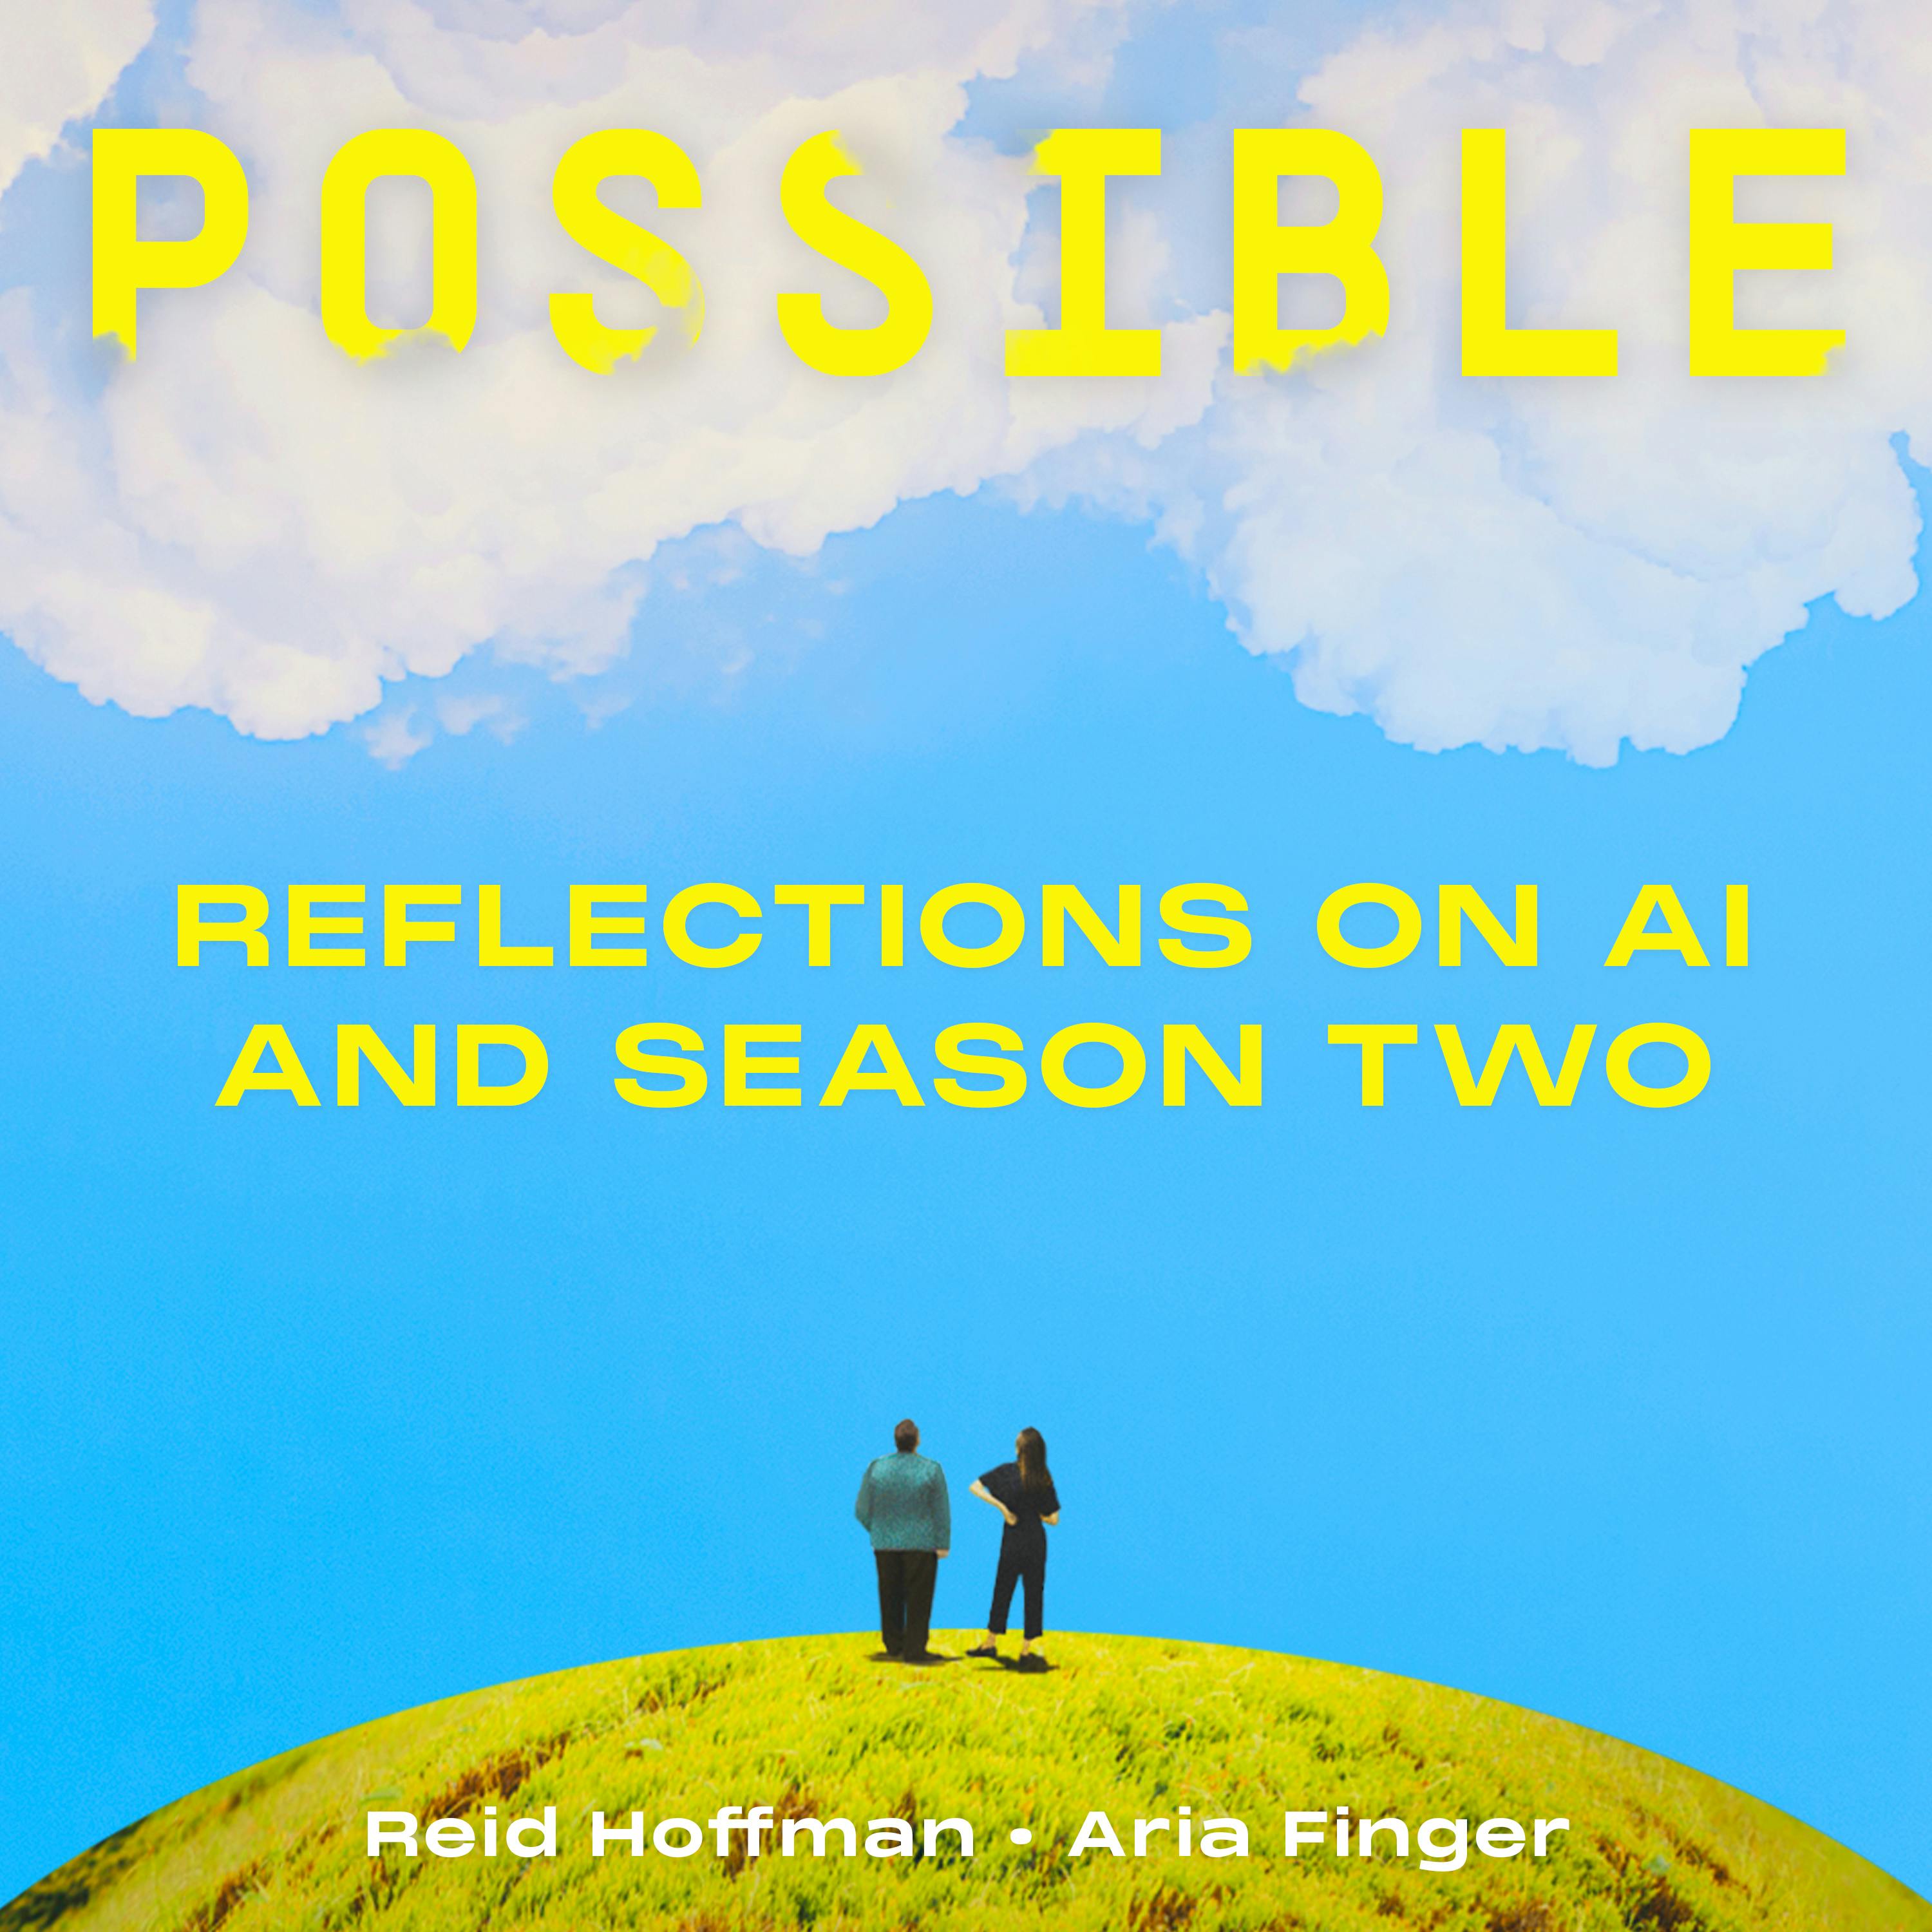 Reflections on AI and season two